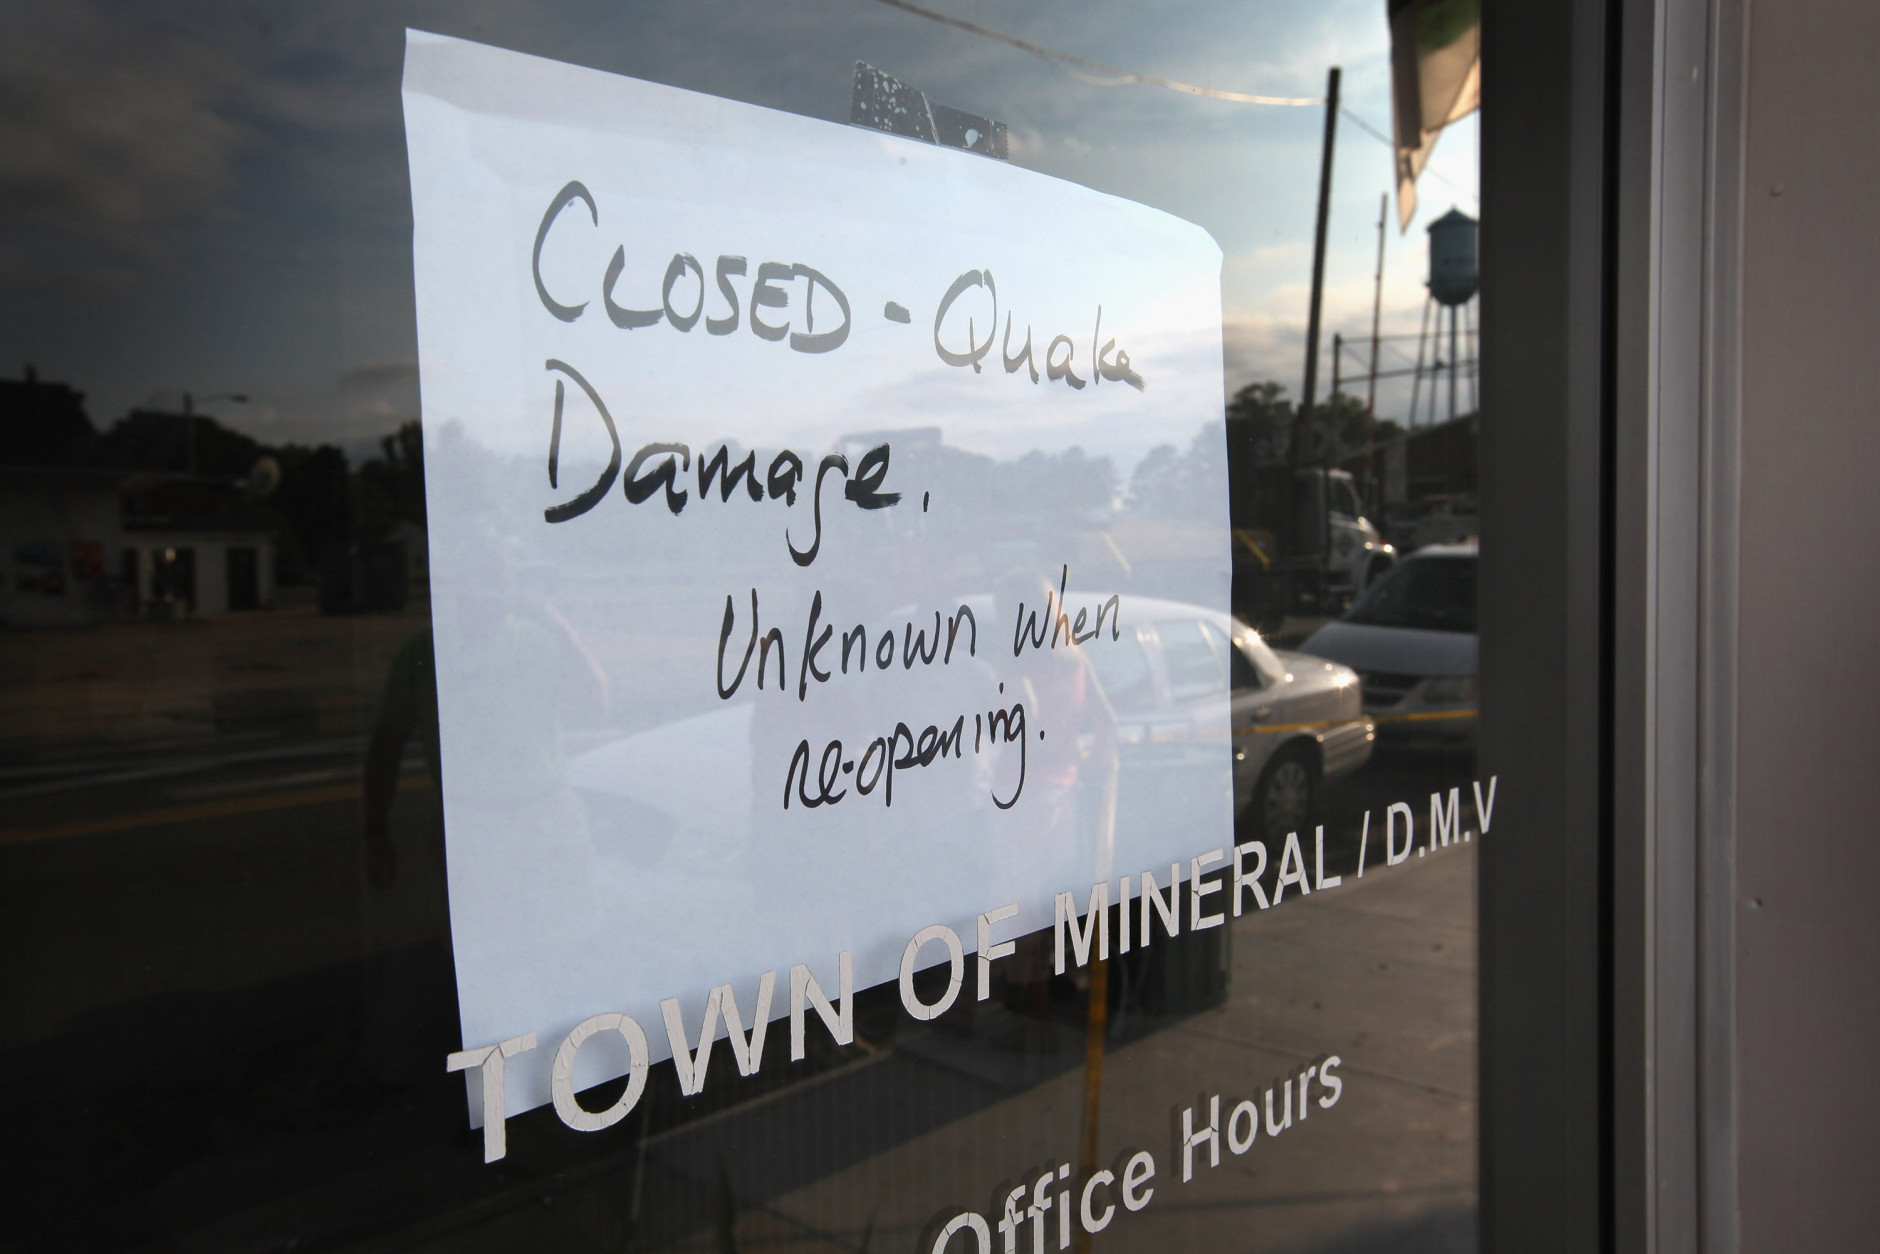 MINERAL, VA - AUGUST 24:  A sign on the door lets visitors know that City Hall, which shares a building with the local DMV office, was closed after the building was damged by yesterday's 5.8 earthquake August 24, 2011 in Mineral, Virginia. The epicenter of the quake, the East Coast's largest since 1944, was located a few miles outside of Mineral, a town of 430 people located about 50 miles west of Richmond.  (Photo by Scott Olson/Getty Images)